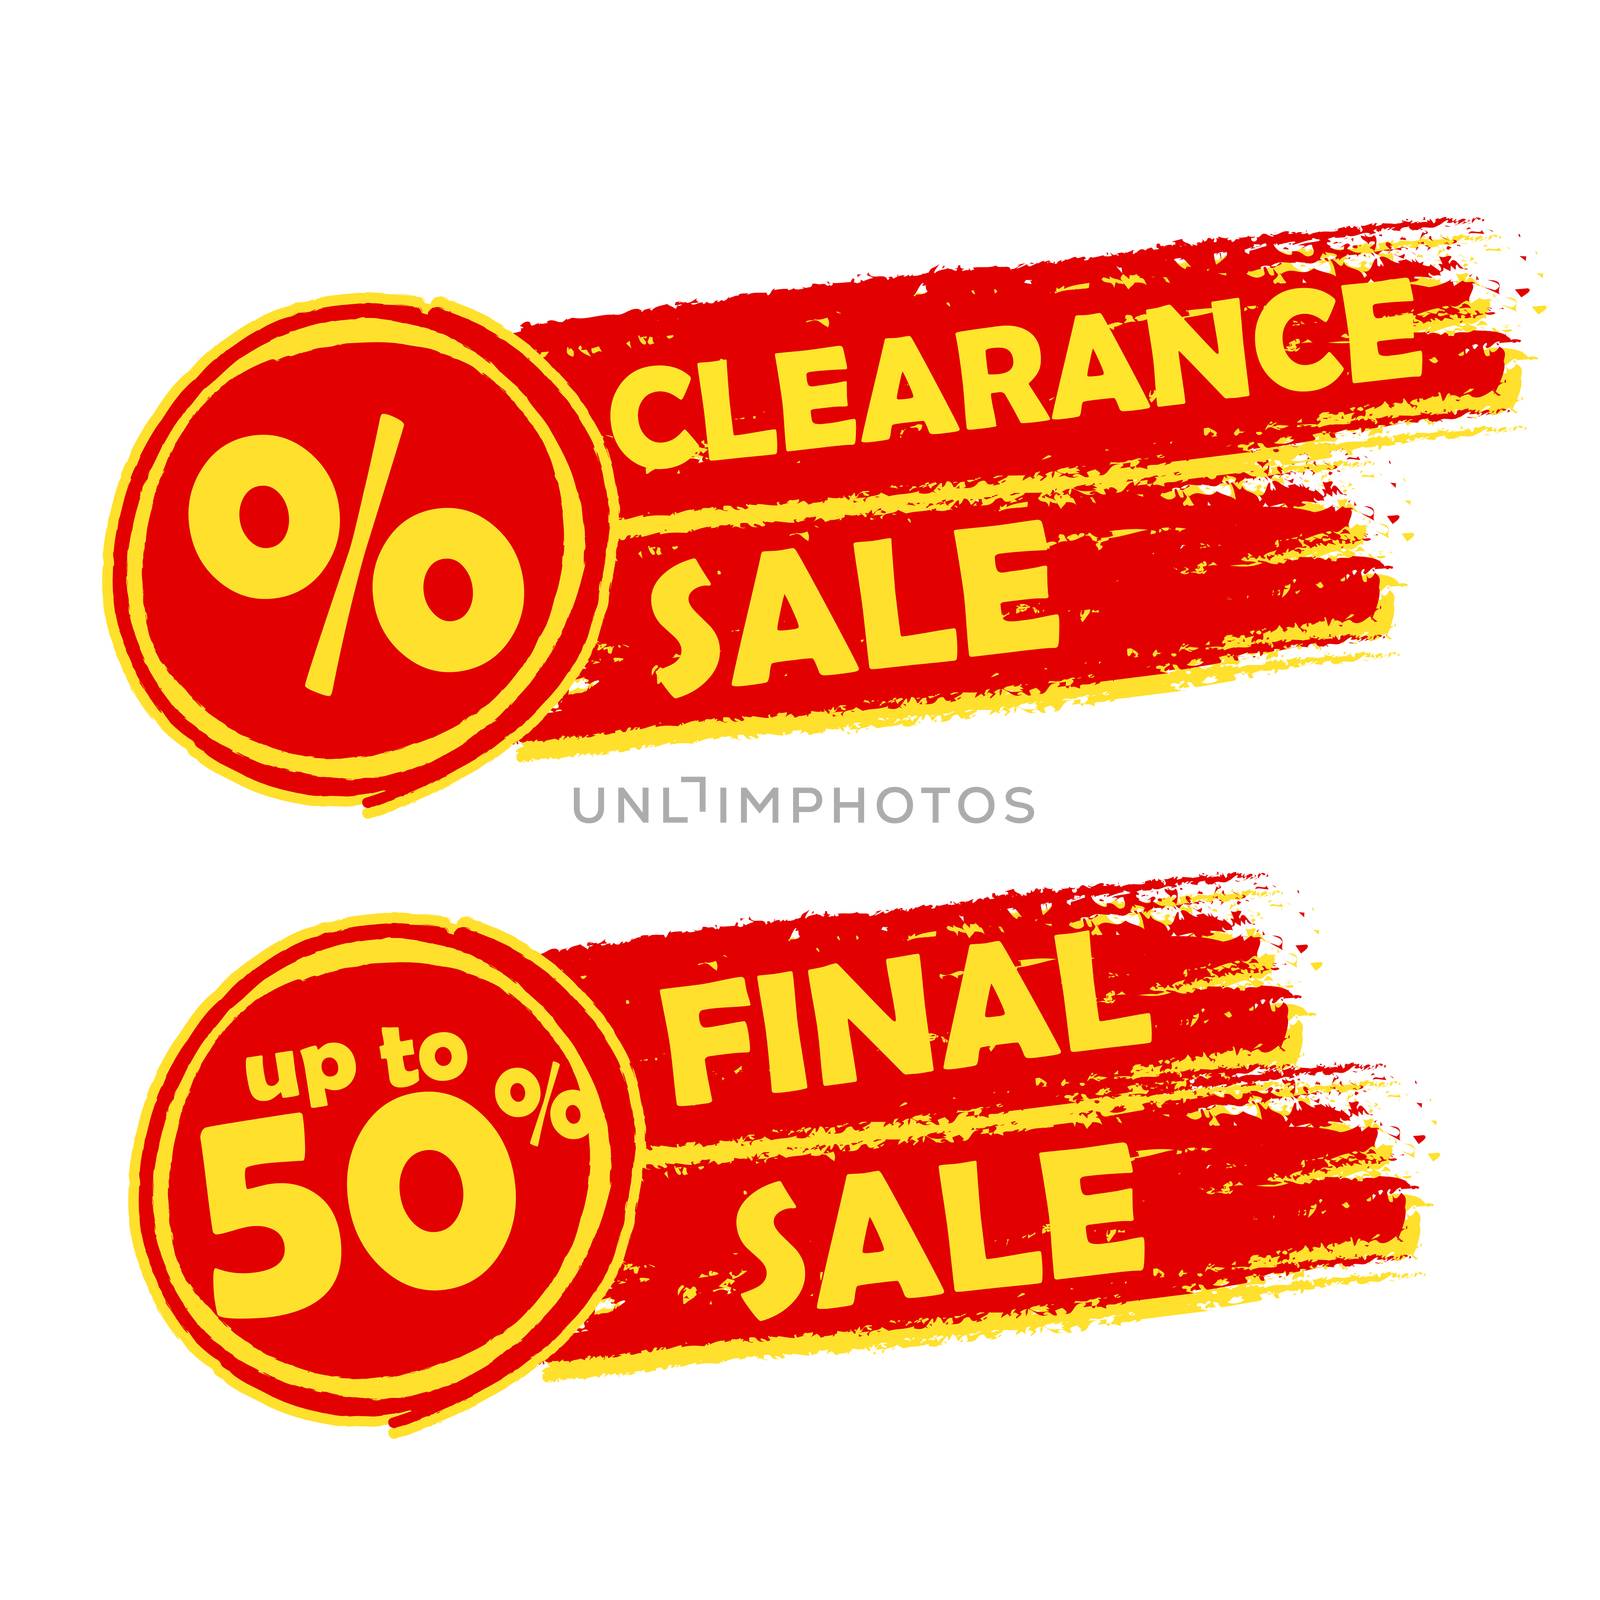 clearance and final sale with percent and 50 percentage signs banners - text in orange drawn labels with symbols, business commerce shopping concept